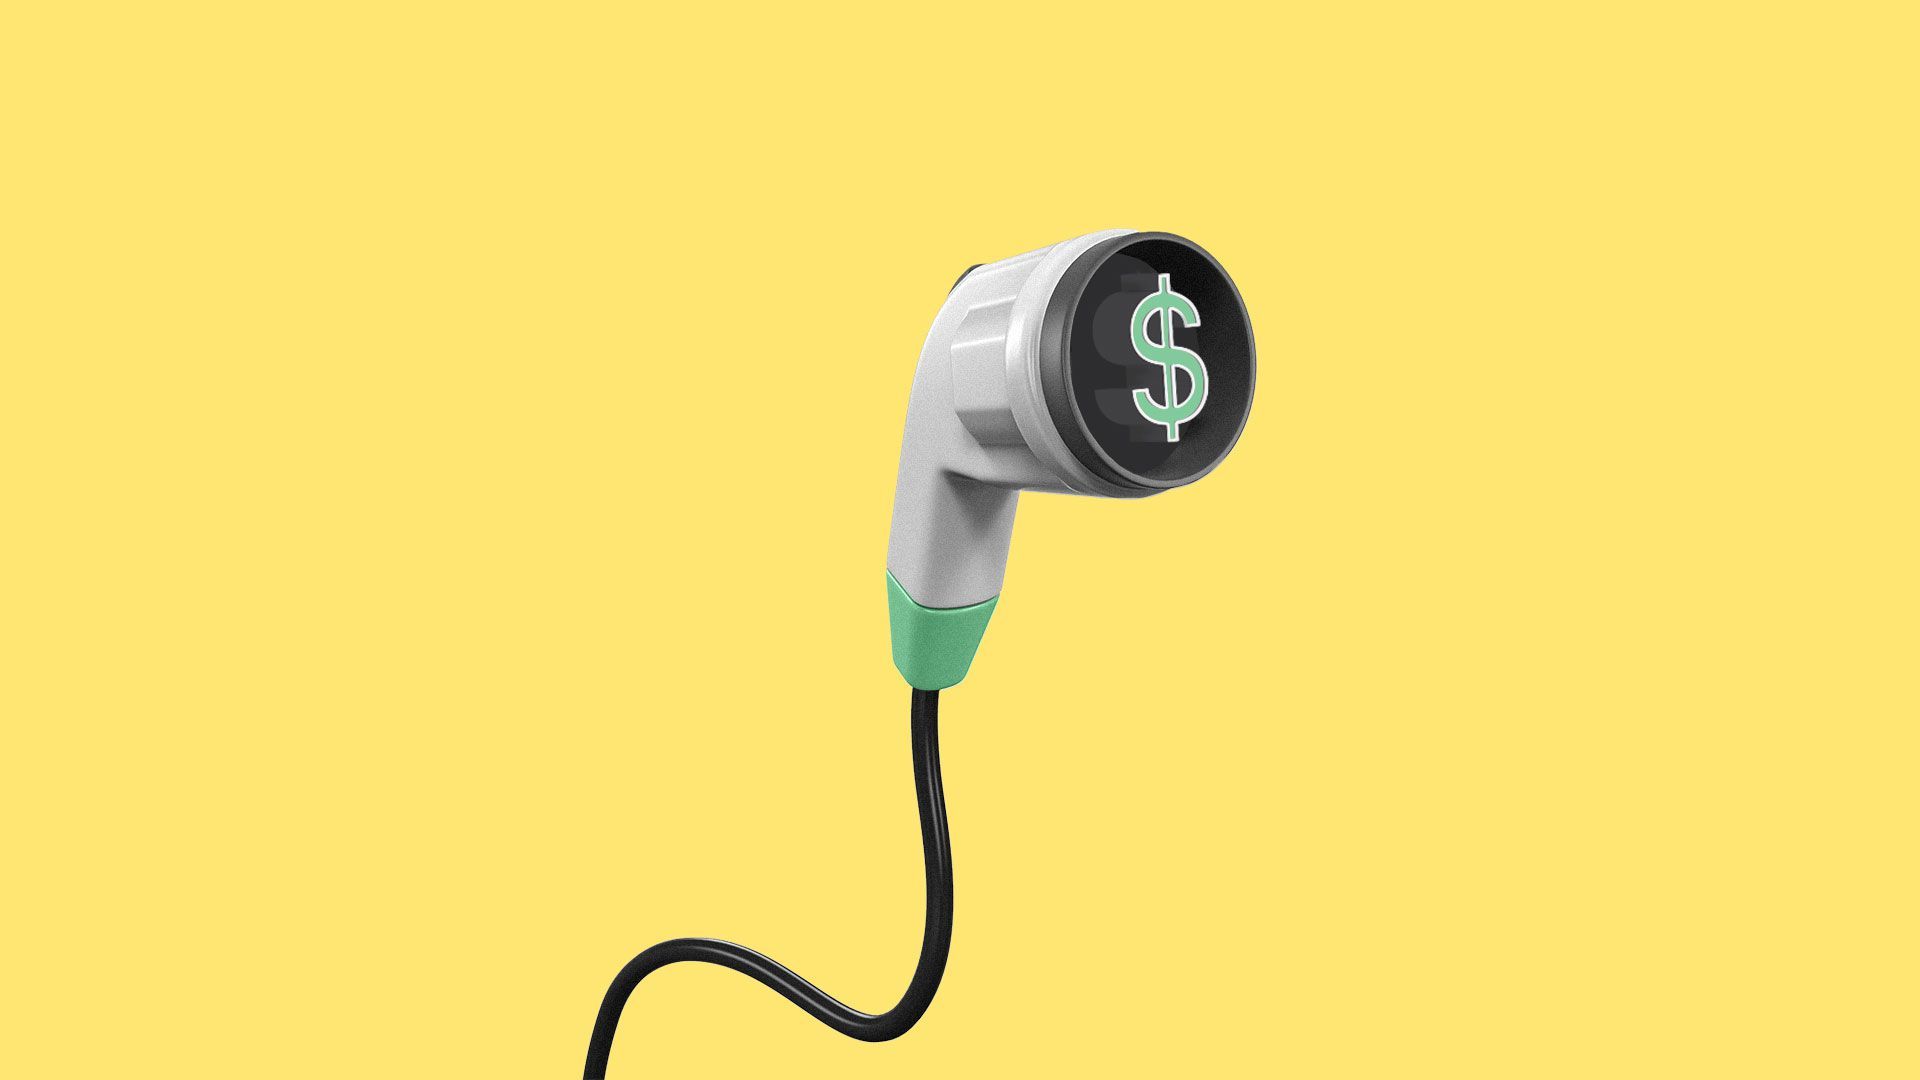 Illustration of an electric car charging pump with a dollar bill as the prong.